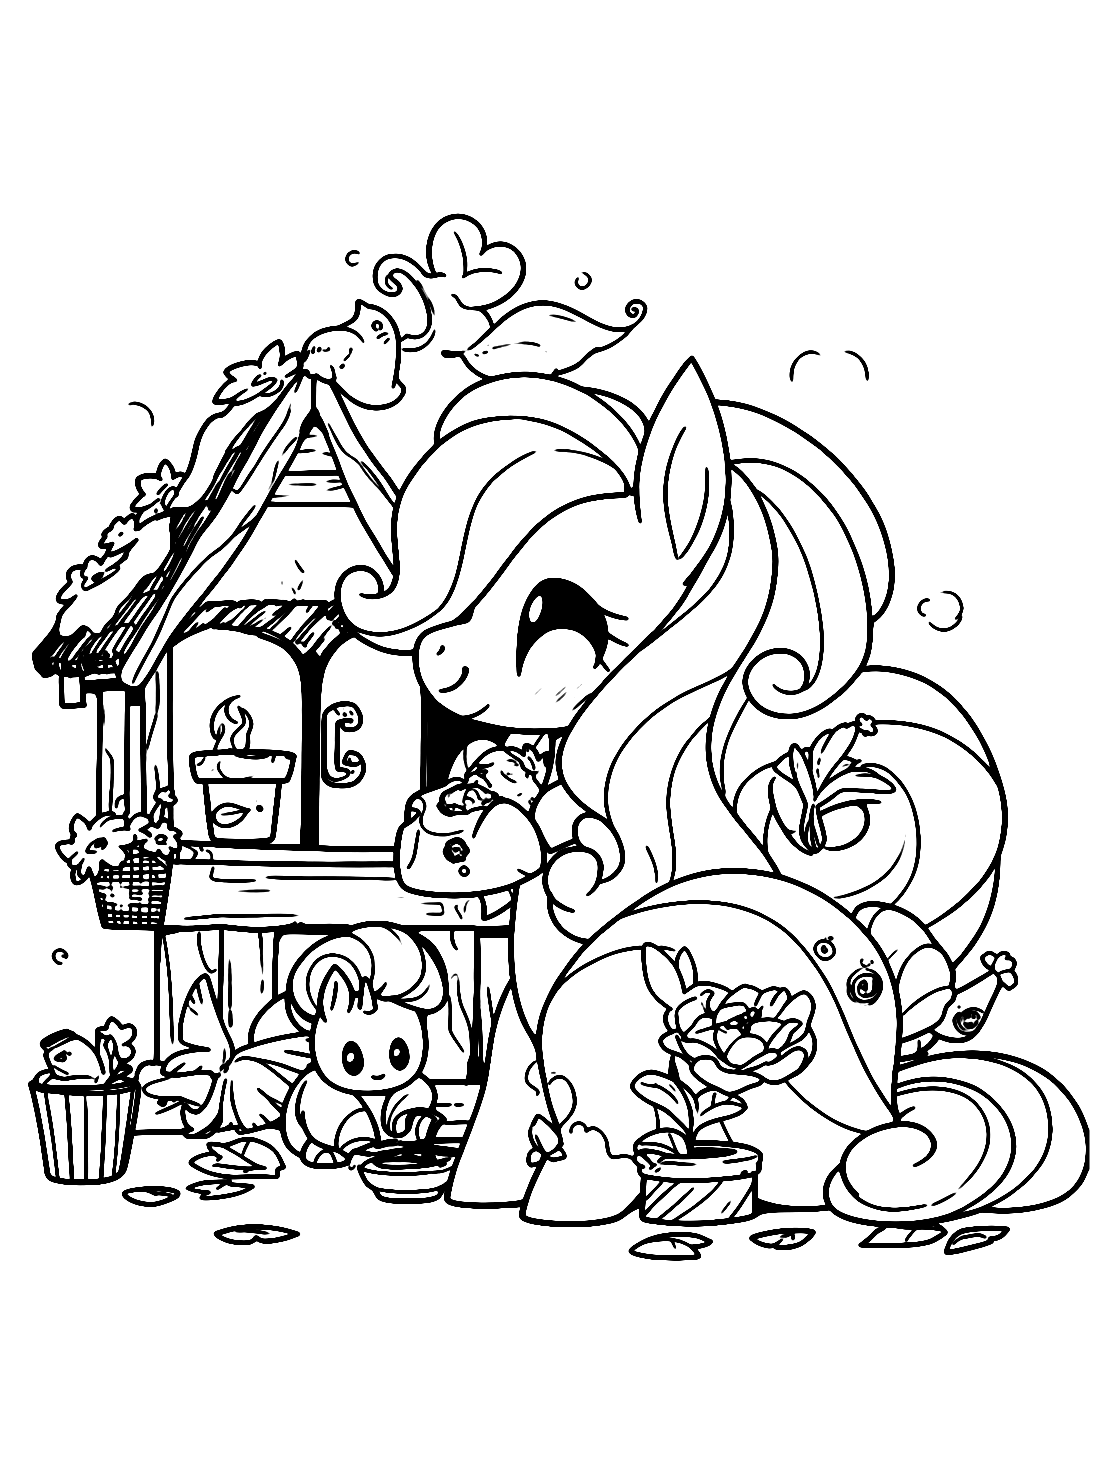 Fluttershy My little Pony Coloring Page